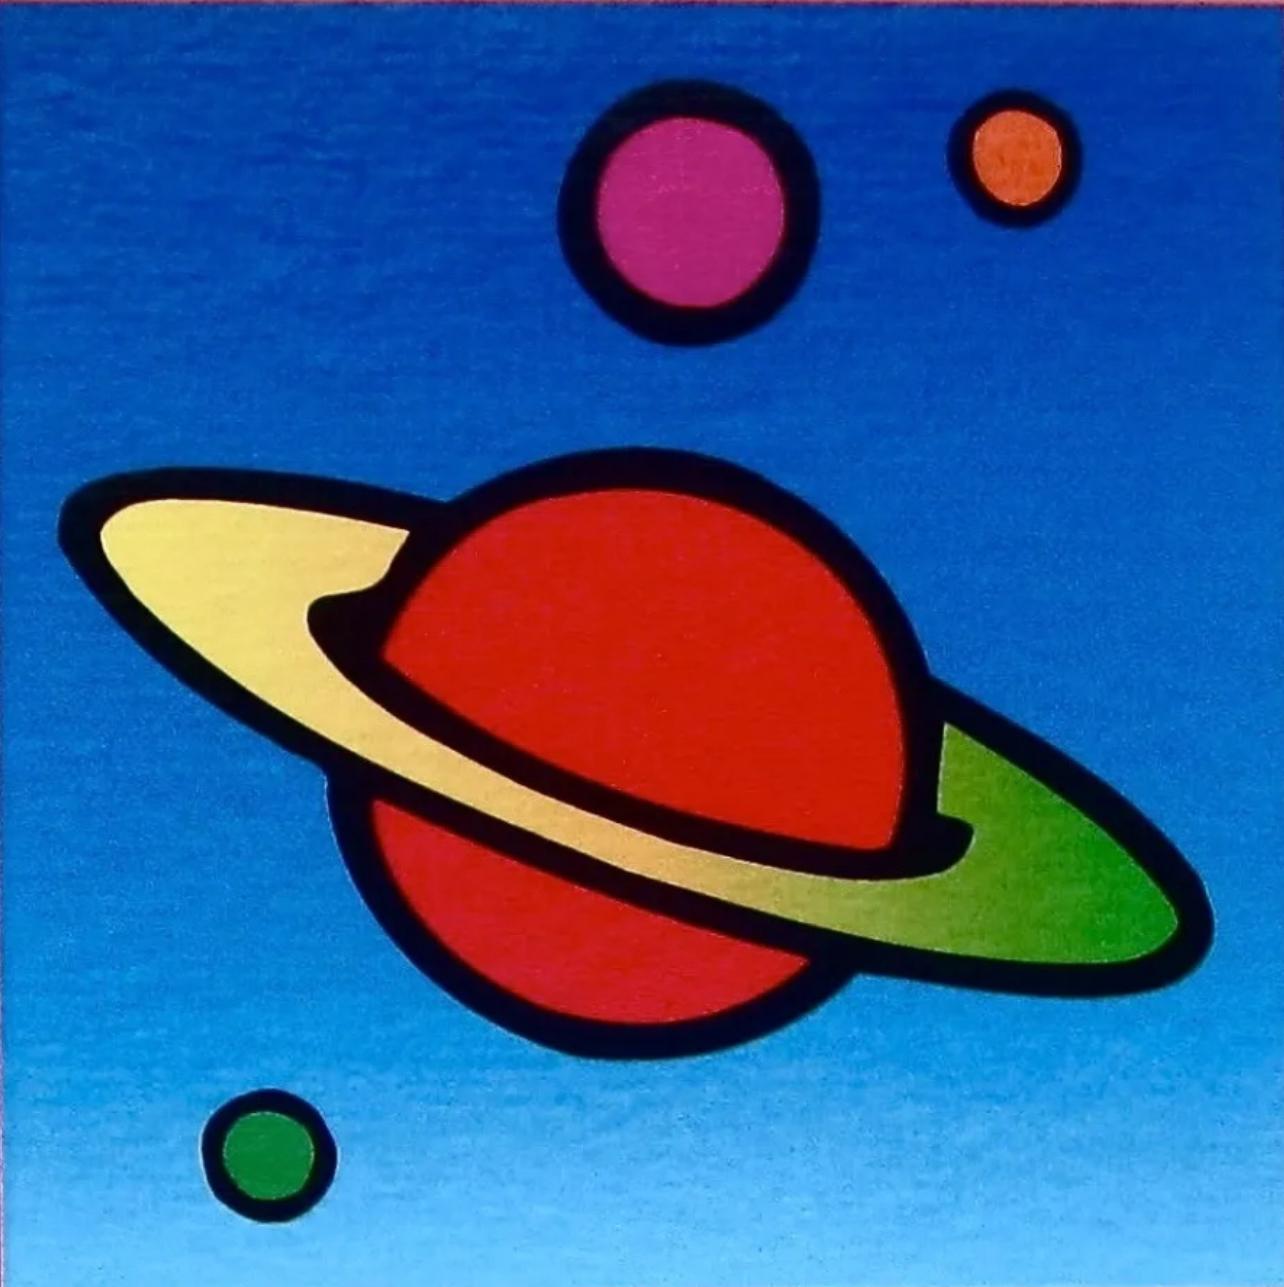 Artist: Peter Max (1937)
Title: Cosmic Saturn
Year: 2003
Edition: 452/500, plus proofs
Medium: Lithograph on Lustro Saxony paper
Size: 3.43 x 2.62 inches
Condition: Excellent
Inscription: Signed and numbered by the artist.
Notes: Published by Via